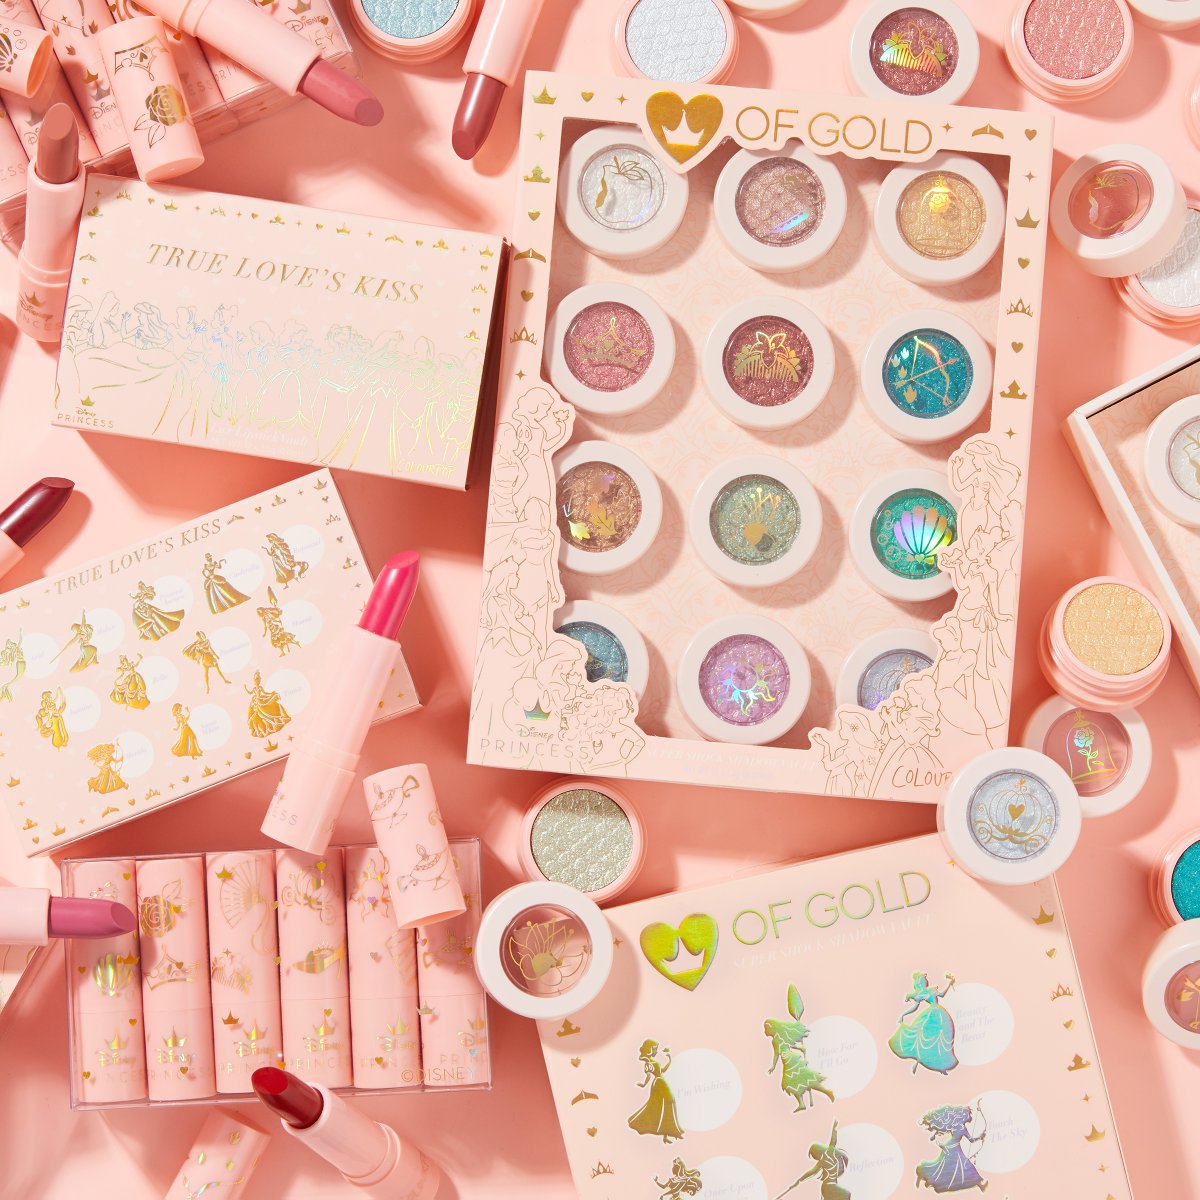 #GIVEAWAY A giveaway fit for any kind of royalty! 👑🧚✨ FIVE lucky winners will receive the FULL Disney Princess-inspired Lux Lipstick Vault and Heart of Gold Super Shock Shadow Vault!! 🤩 HOW TO ENTER ⤵️ ✨ Follow us @ColourPopCo ✨ Like & RT ✨ Reply w/ 👑